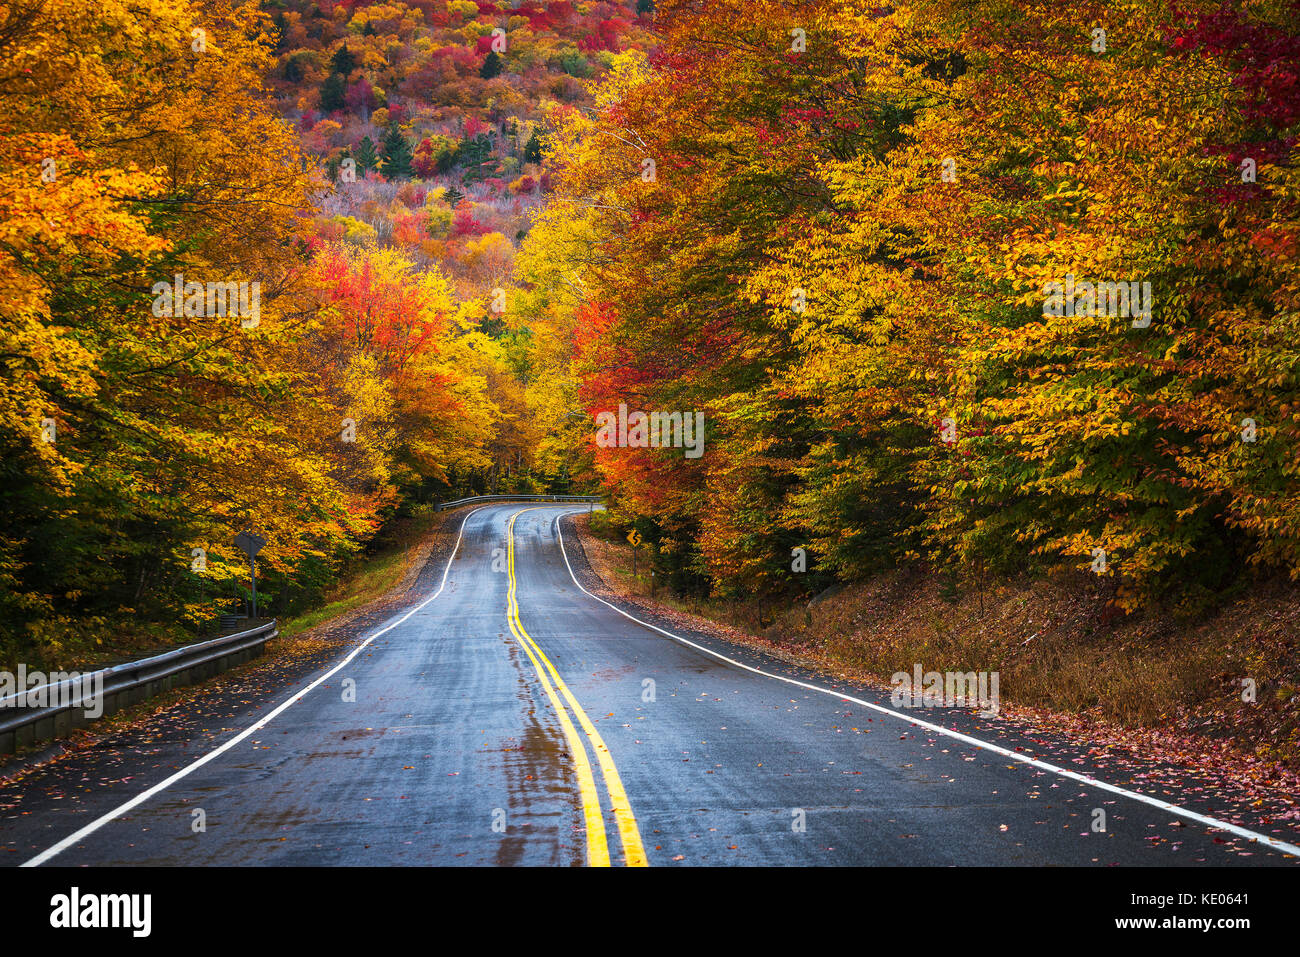 A two lane road, engulfed by colorful autumn foliage, curves and disappears in the forest of the White Mountains of New Hampshire in New England, USA. Stock Photo